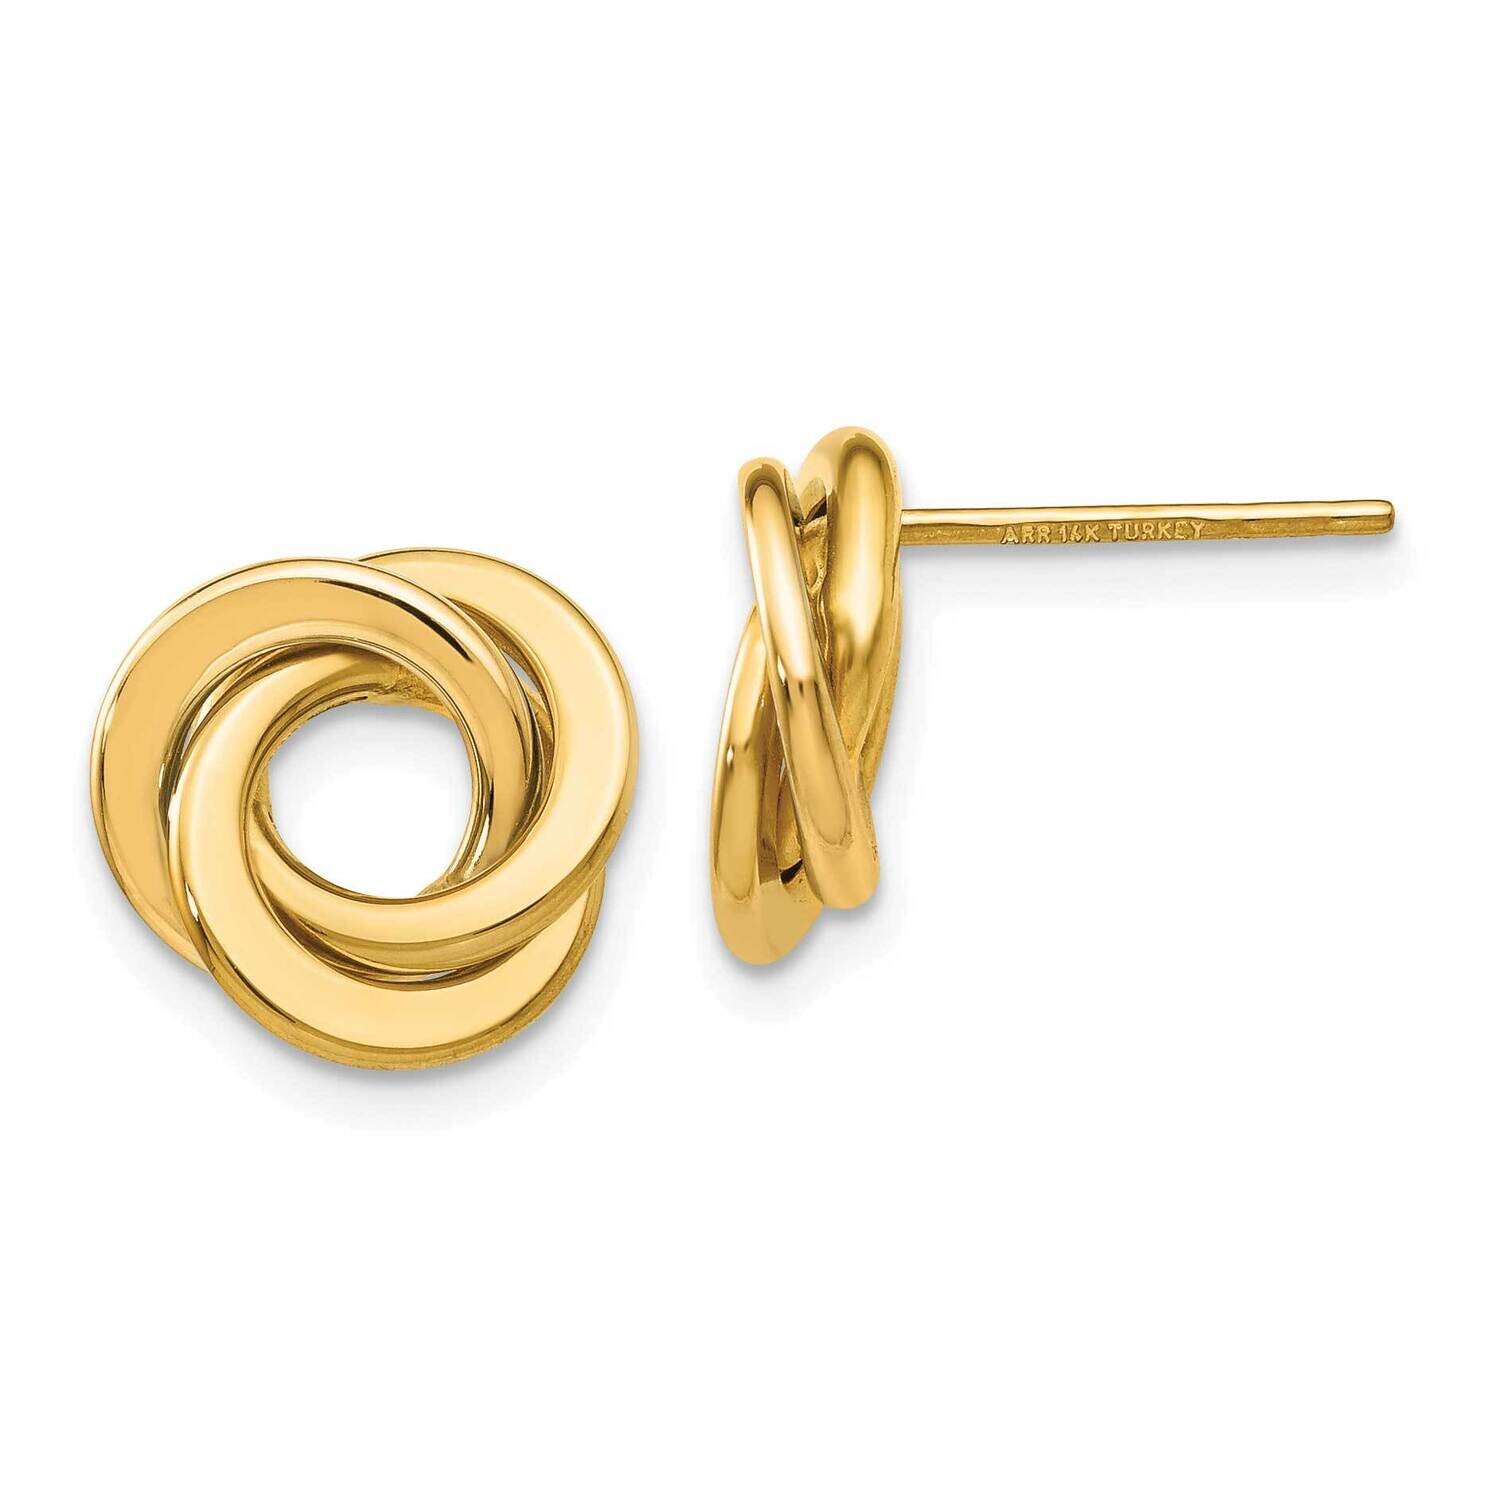 Intertwined Circles Post Earrings 14k Polished Gold TL945Y